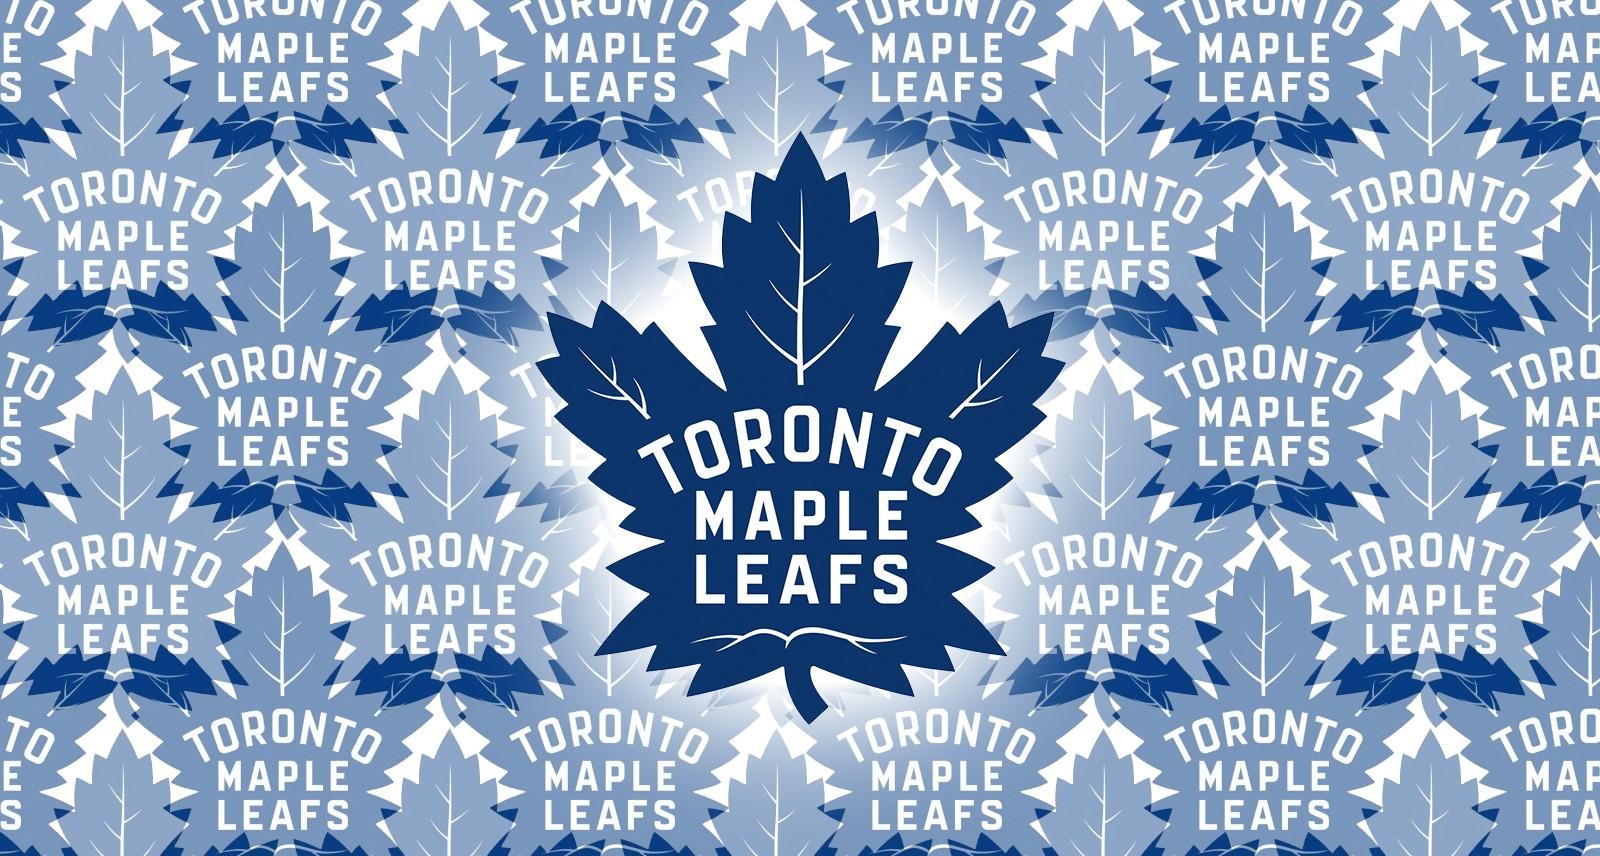 Toronto Maple Leafs Logo - Here's Your First Look at the New Toronto Maple Leafs Logo | Sharp ...